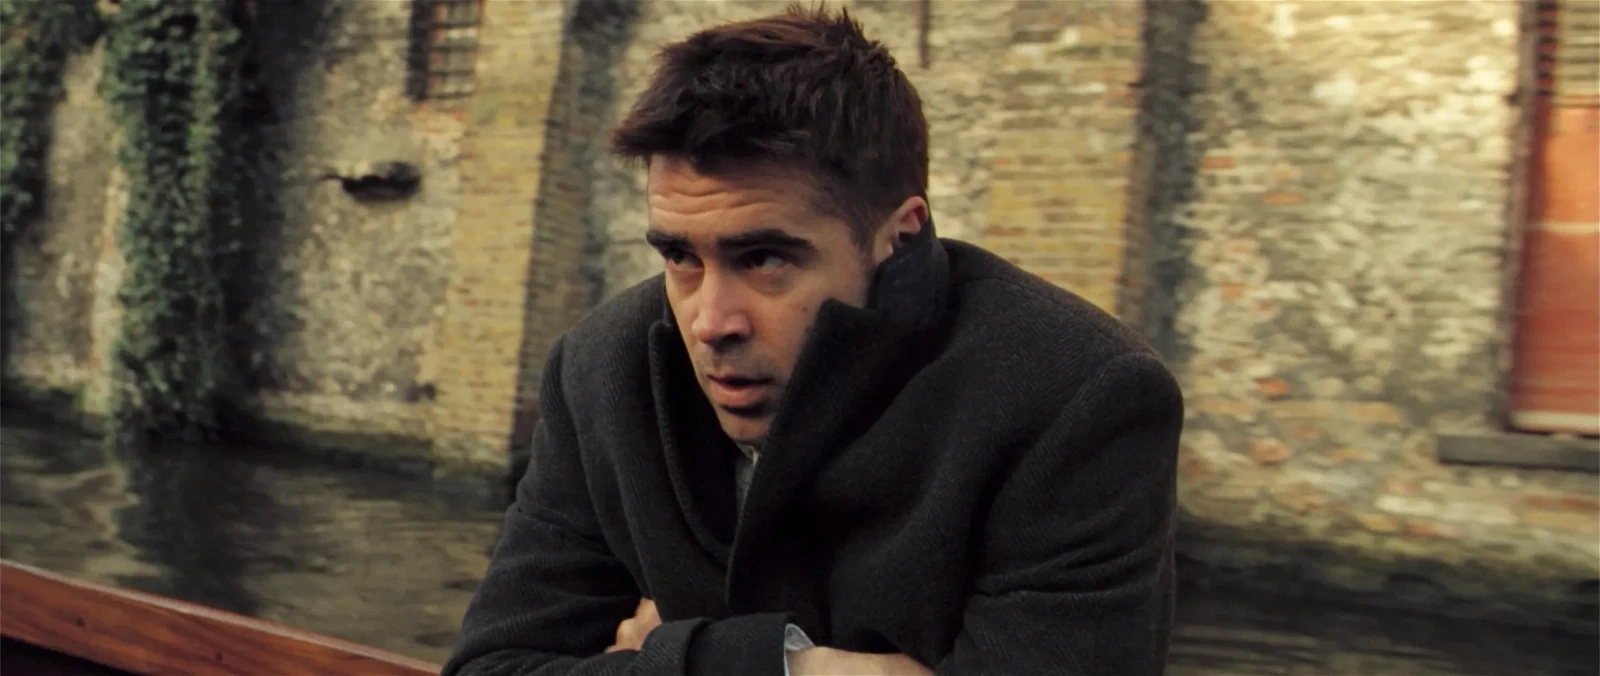 Colin Farrell in a still from In Bruges (2008)